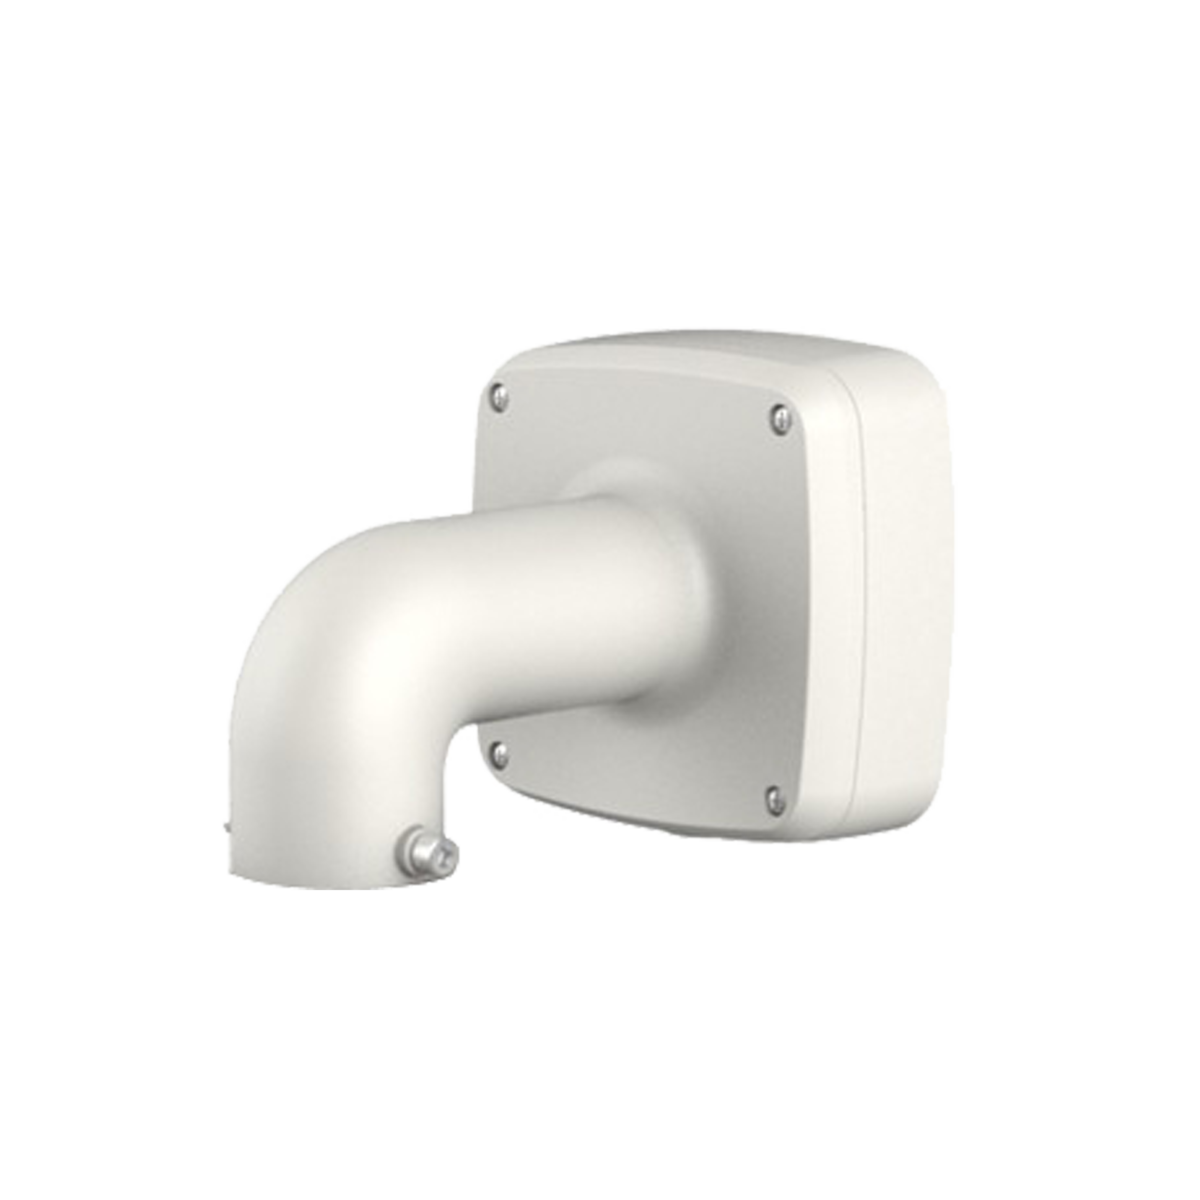 DAHUA DH-PFB302S wall mount bracket with ip66 junction box suits speed dome ptz